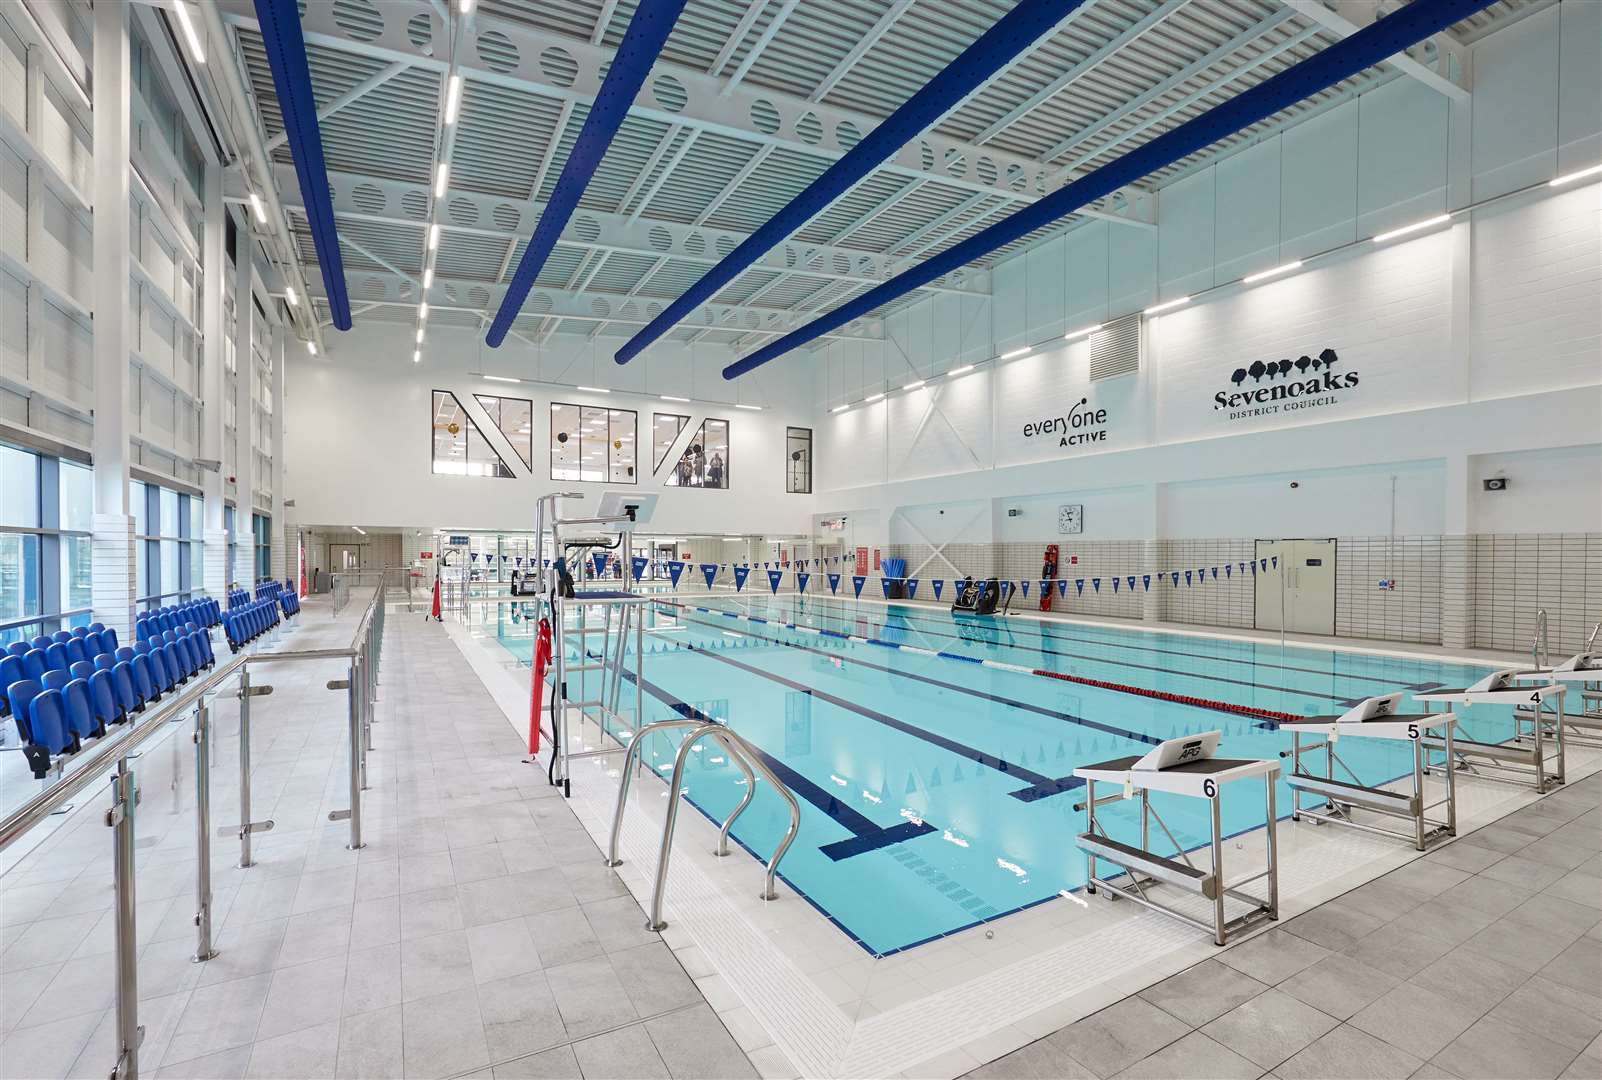 The new centre includes a 25m six lane main pool